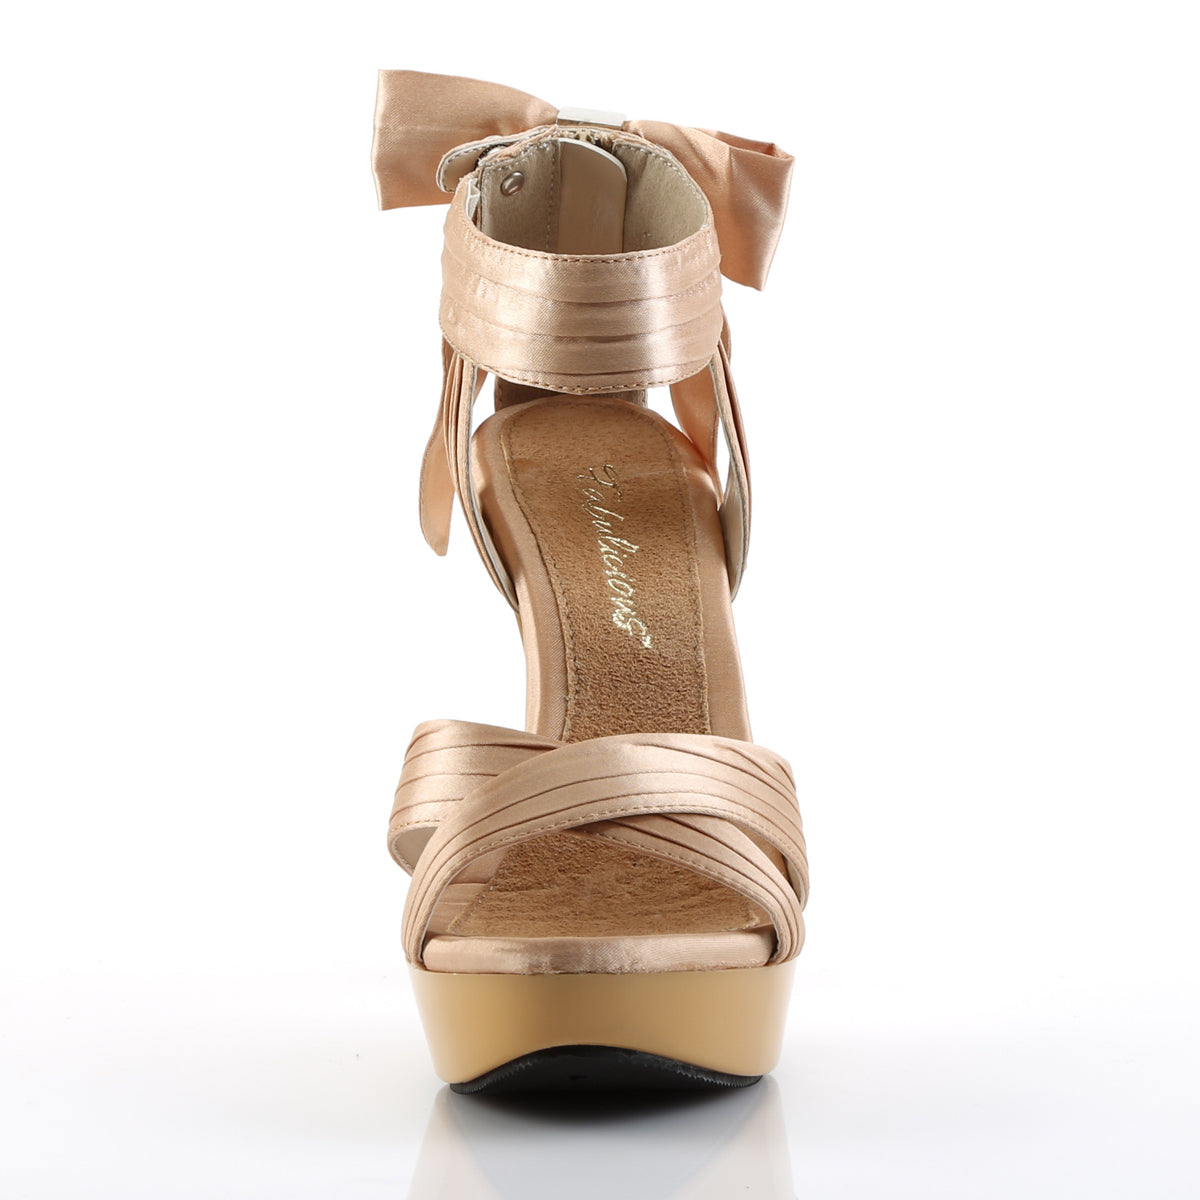 Fabulicious Womens Sandals COCKTAIL-568 Champagne Satin/Champagne